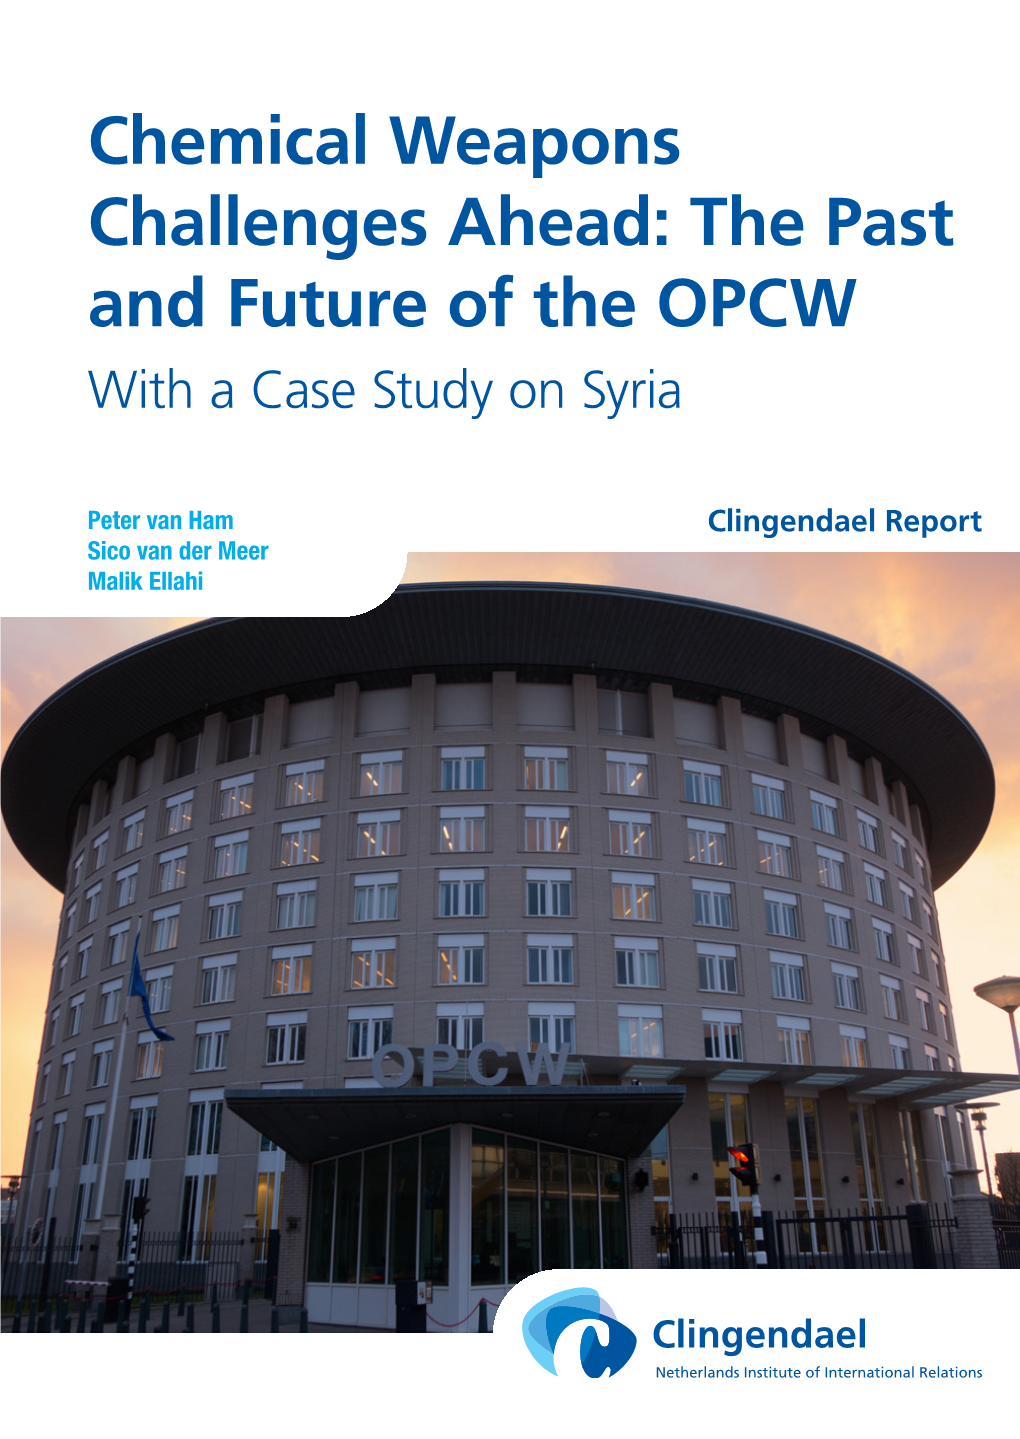 Chemical Weapons Challenges Ahead: the Past and Future of the OPCW with a Case Study on Syria